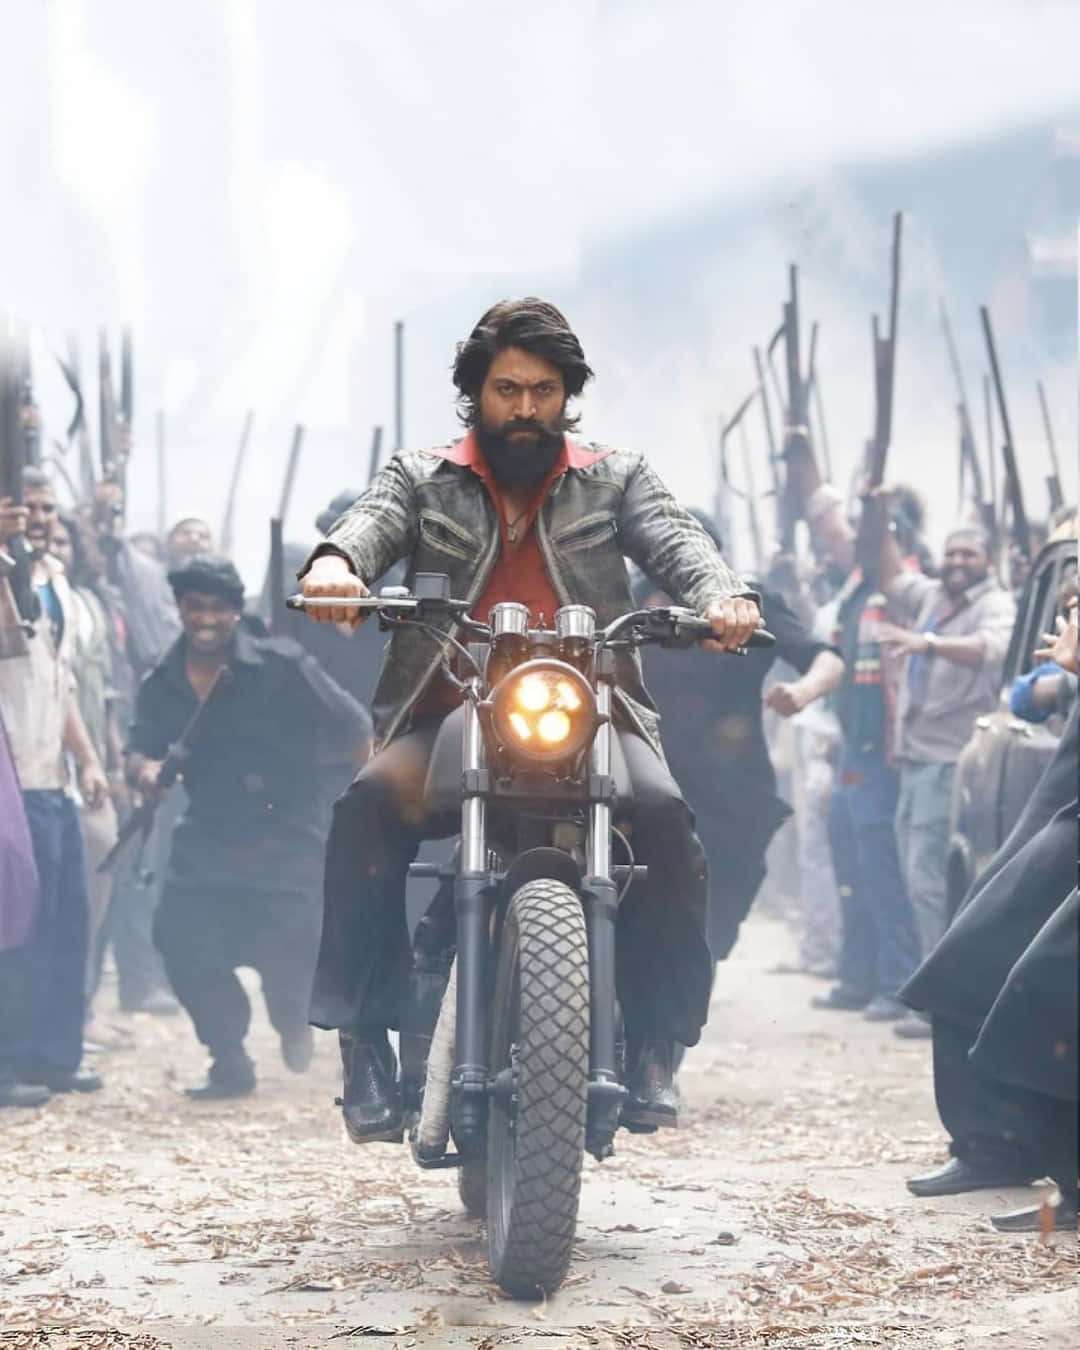 Yash shines brightly in the KGF 2 movie